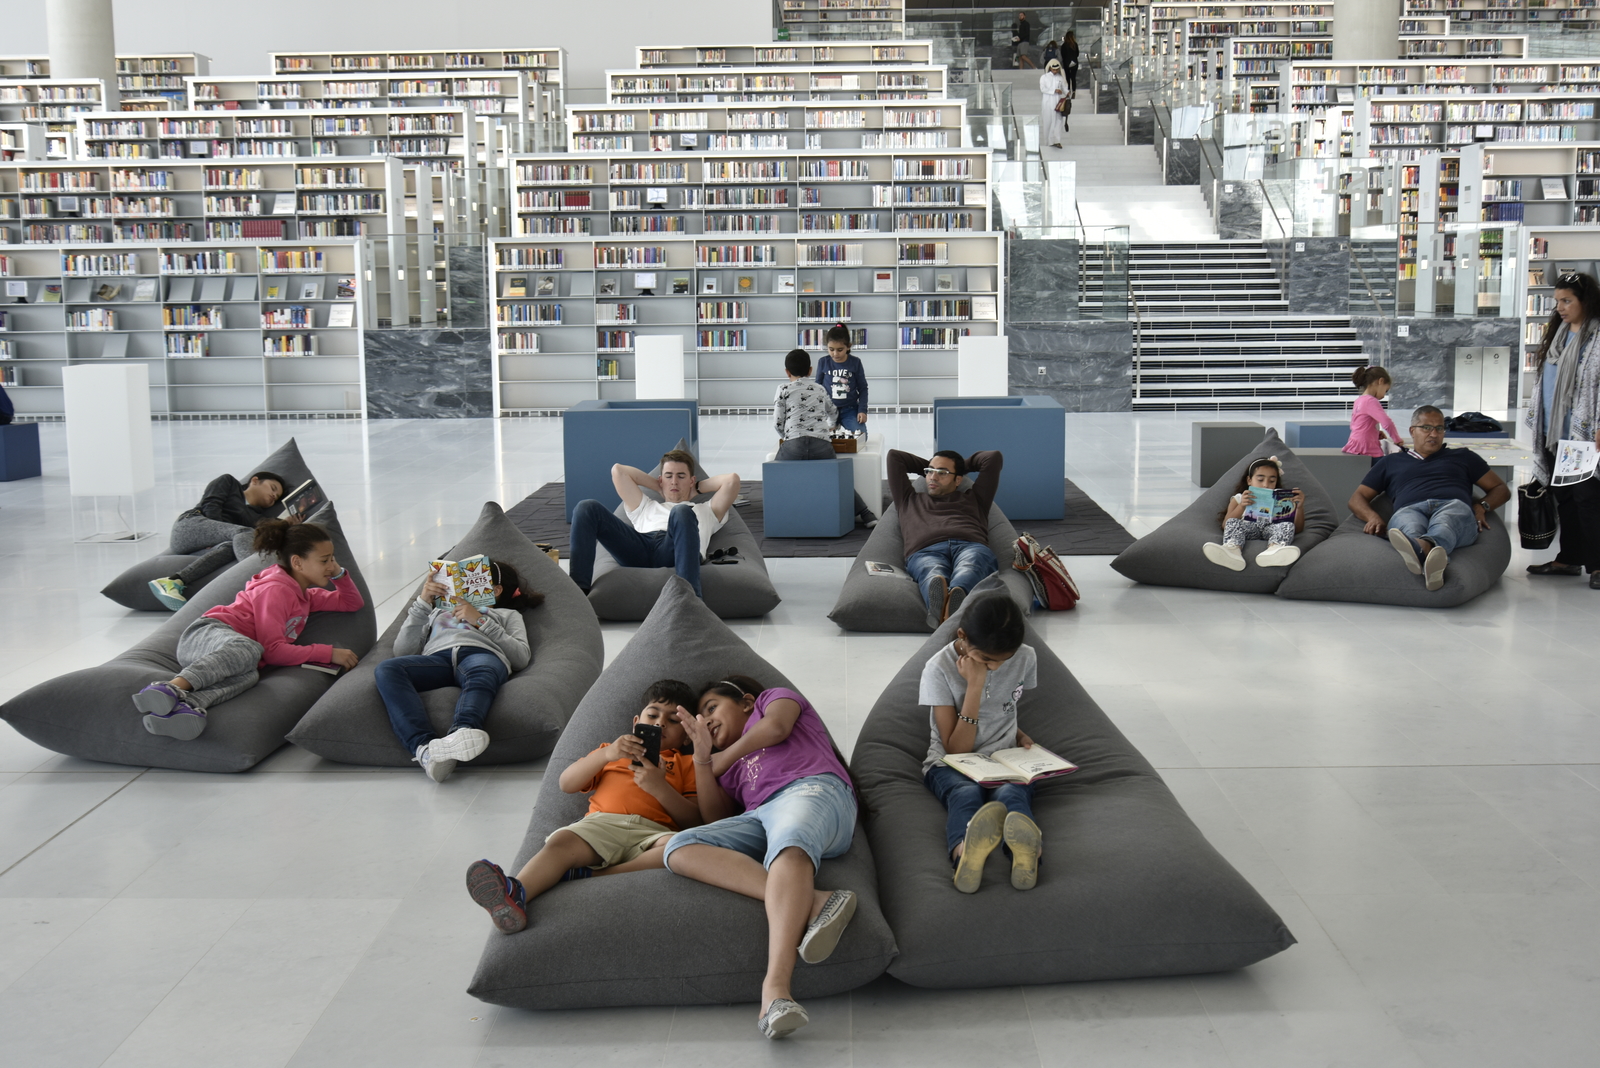 People reading and relaxing on beanbag chairs inside the new Qatar National Library.